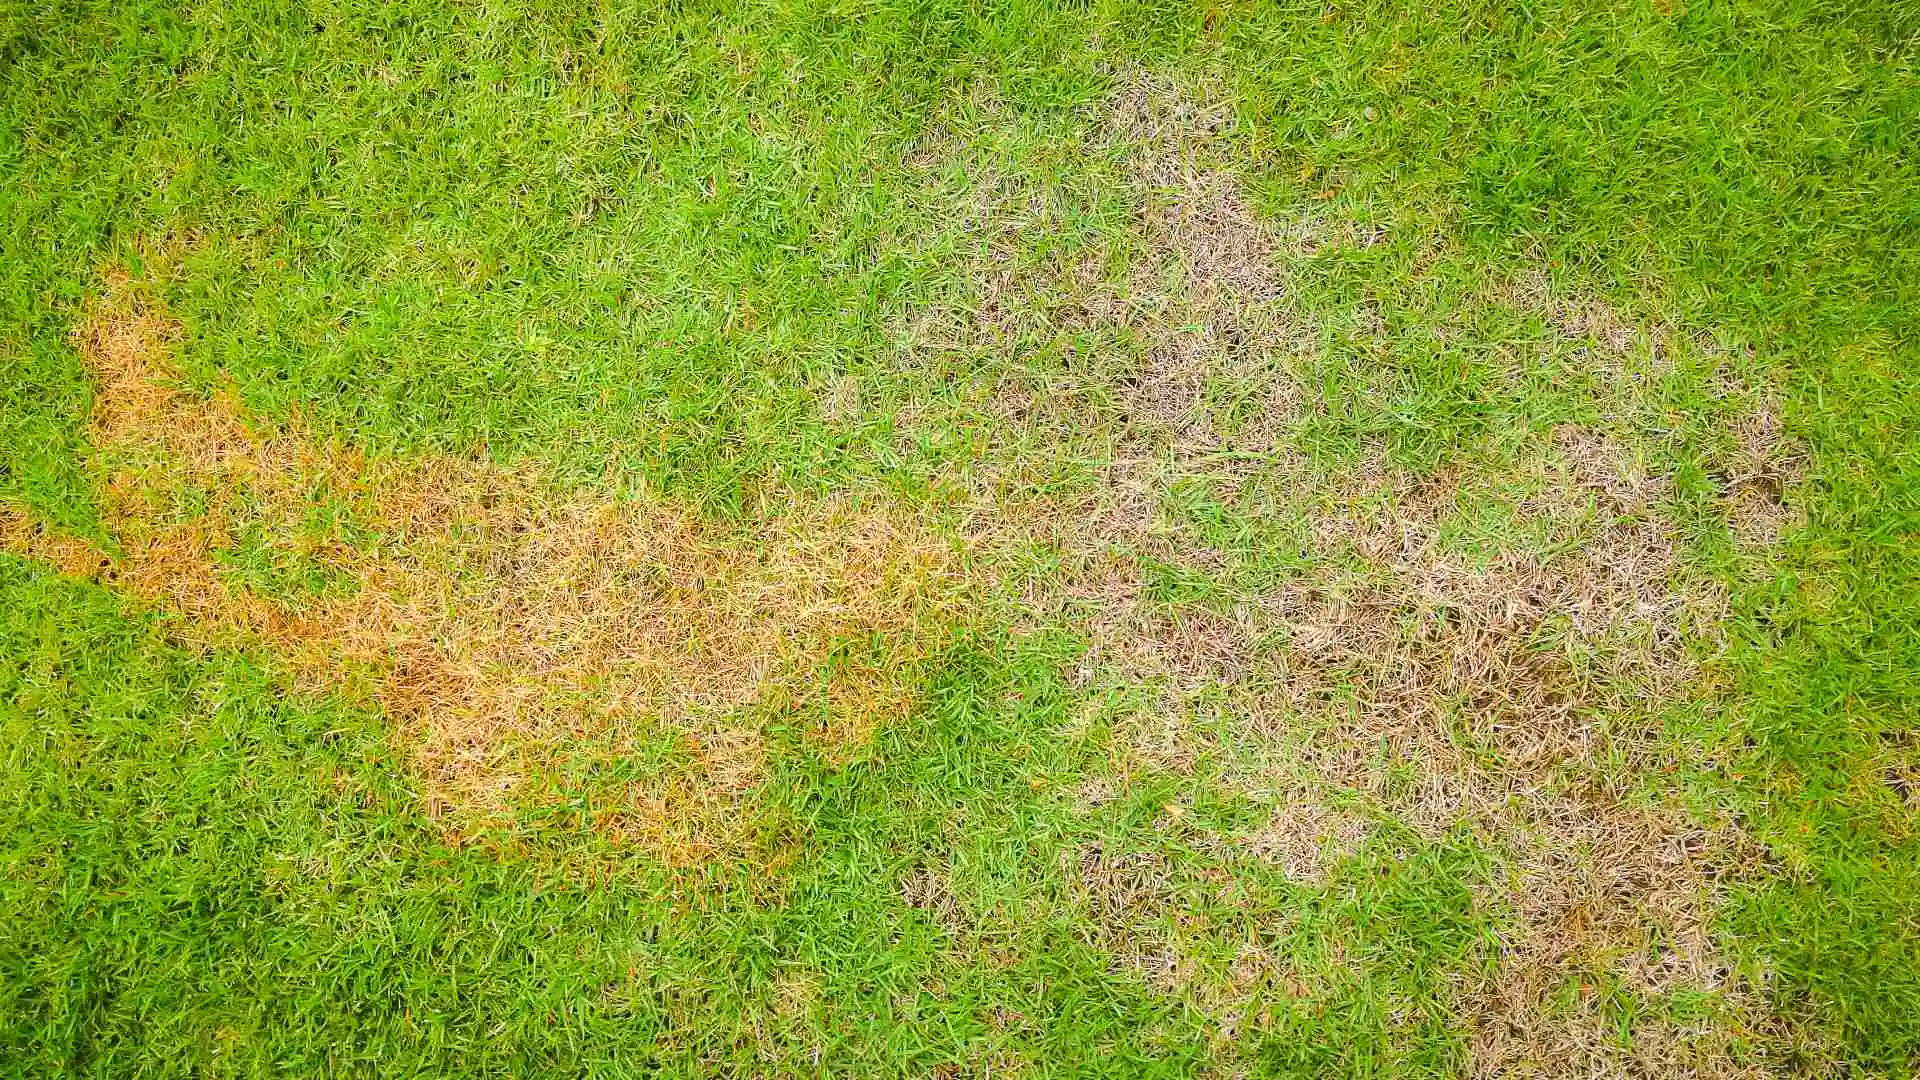 How to Help Your Grass Survive Summer Heat Stress